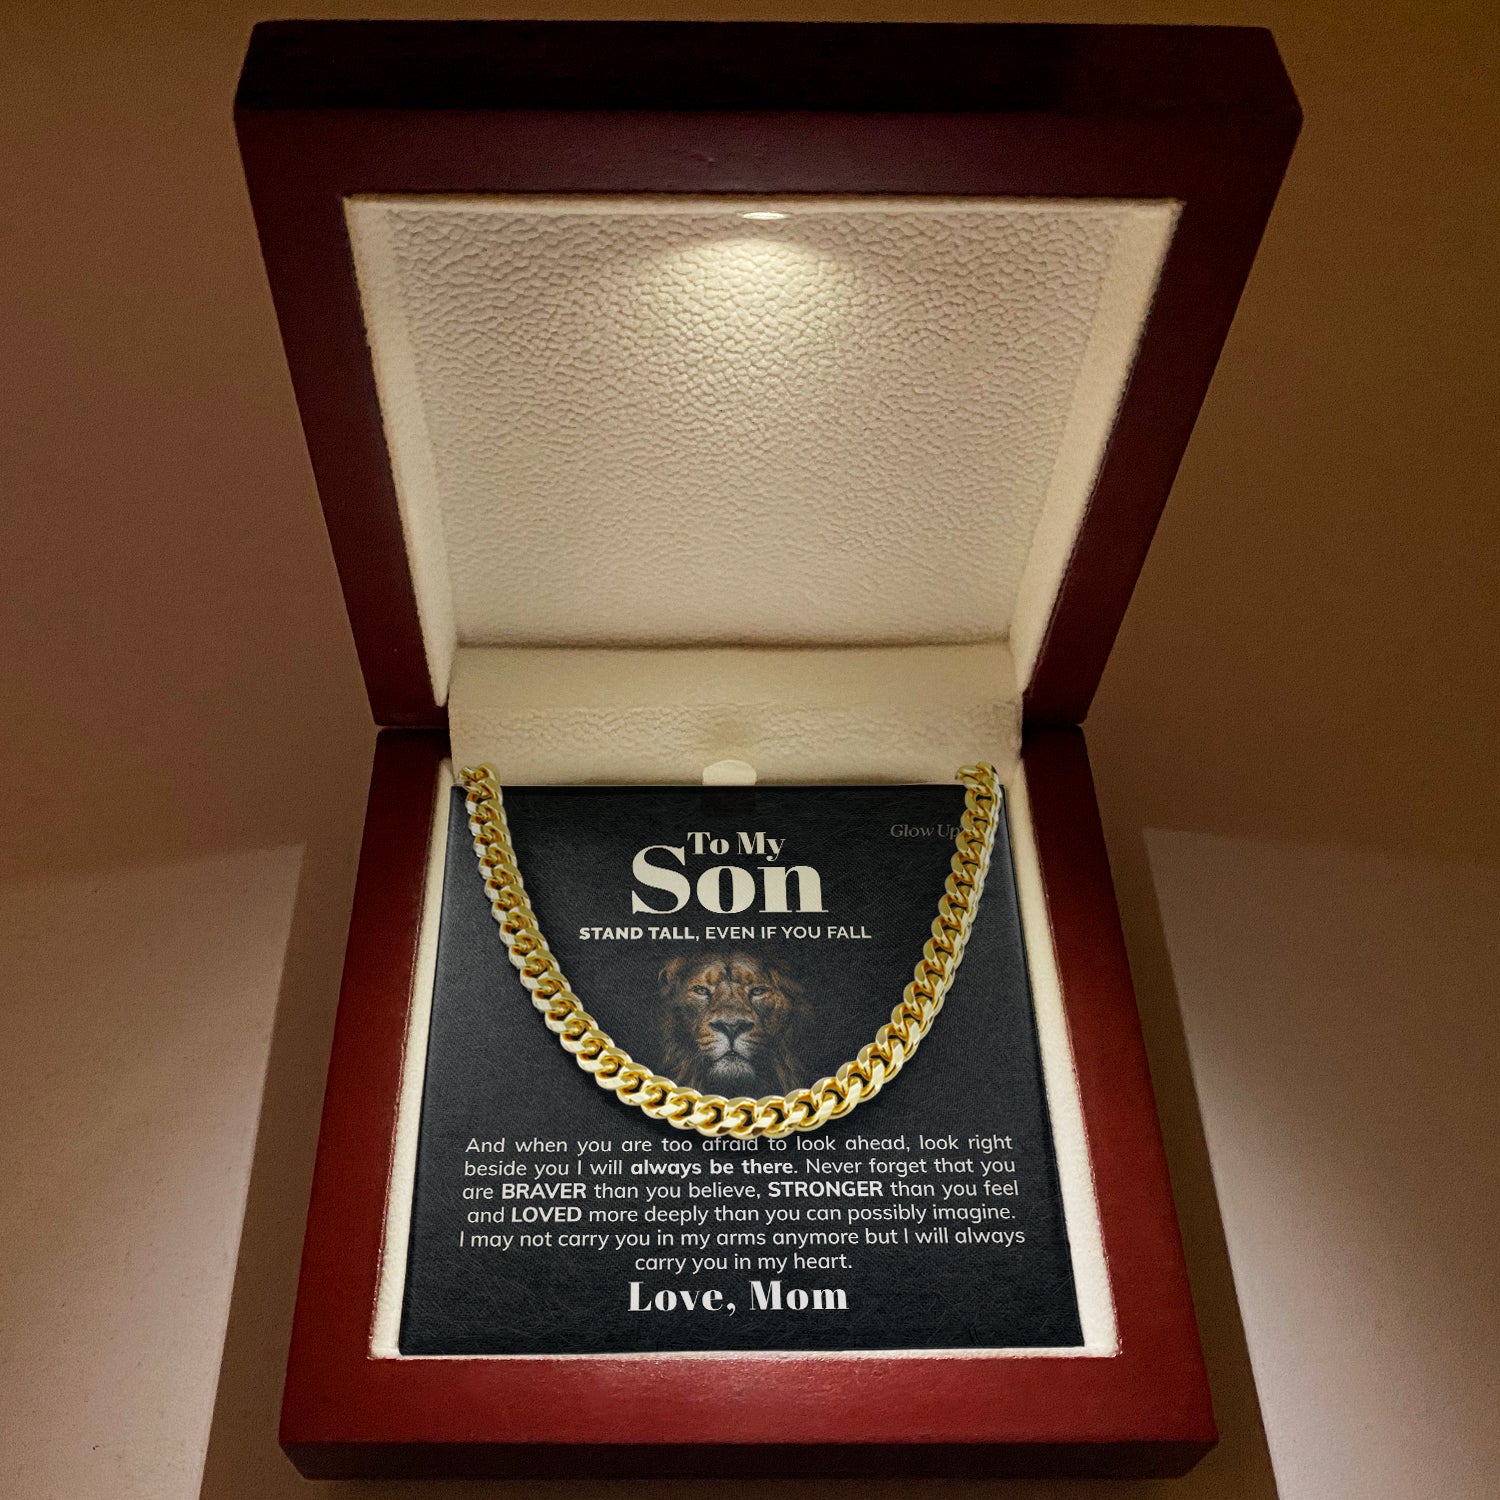 ShineOn Fulfillment Jewelry 14K Yellow Gold Finish / Luxury LED Box To My Son - I carry you in my heart - Cuban Link Chain